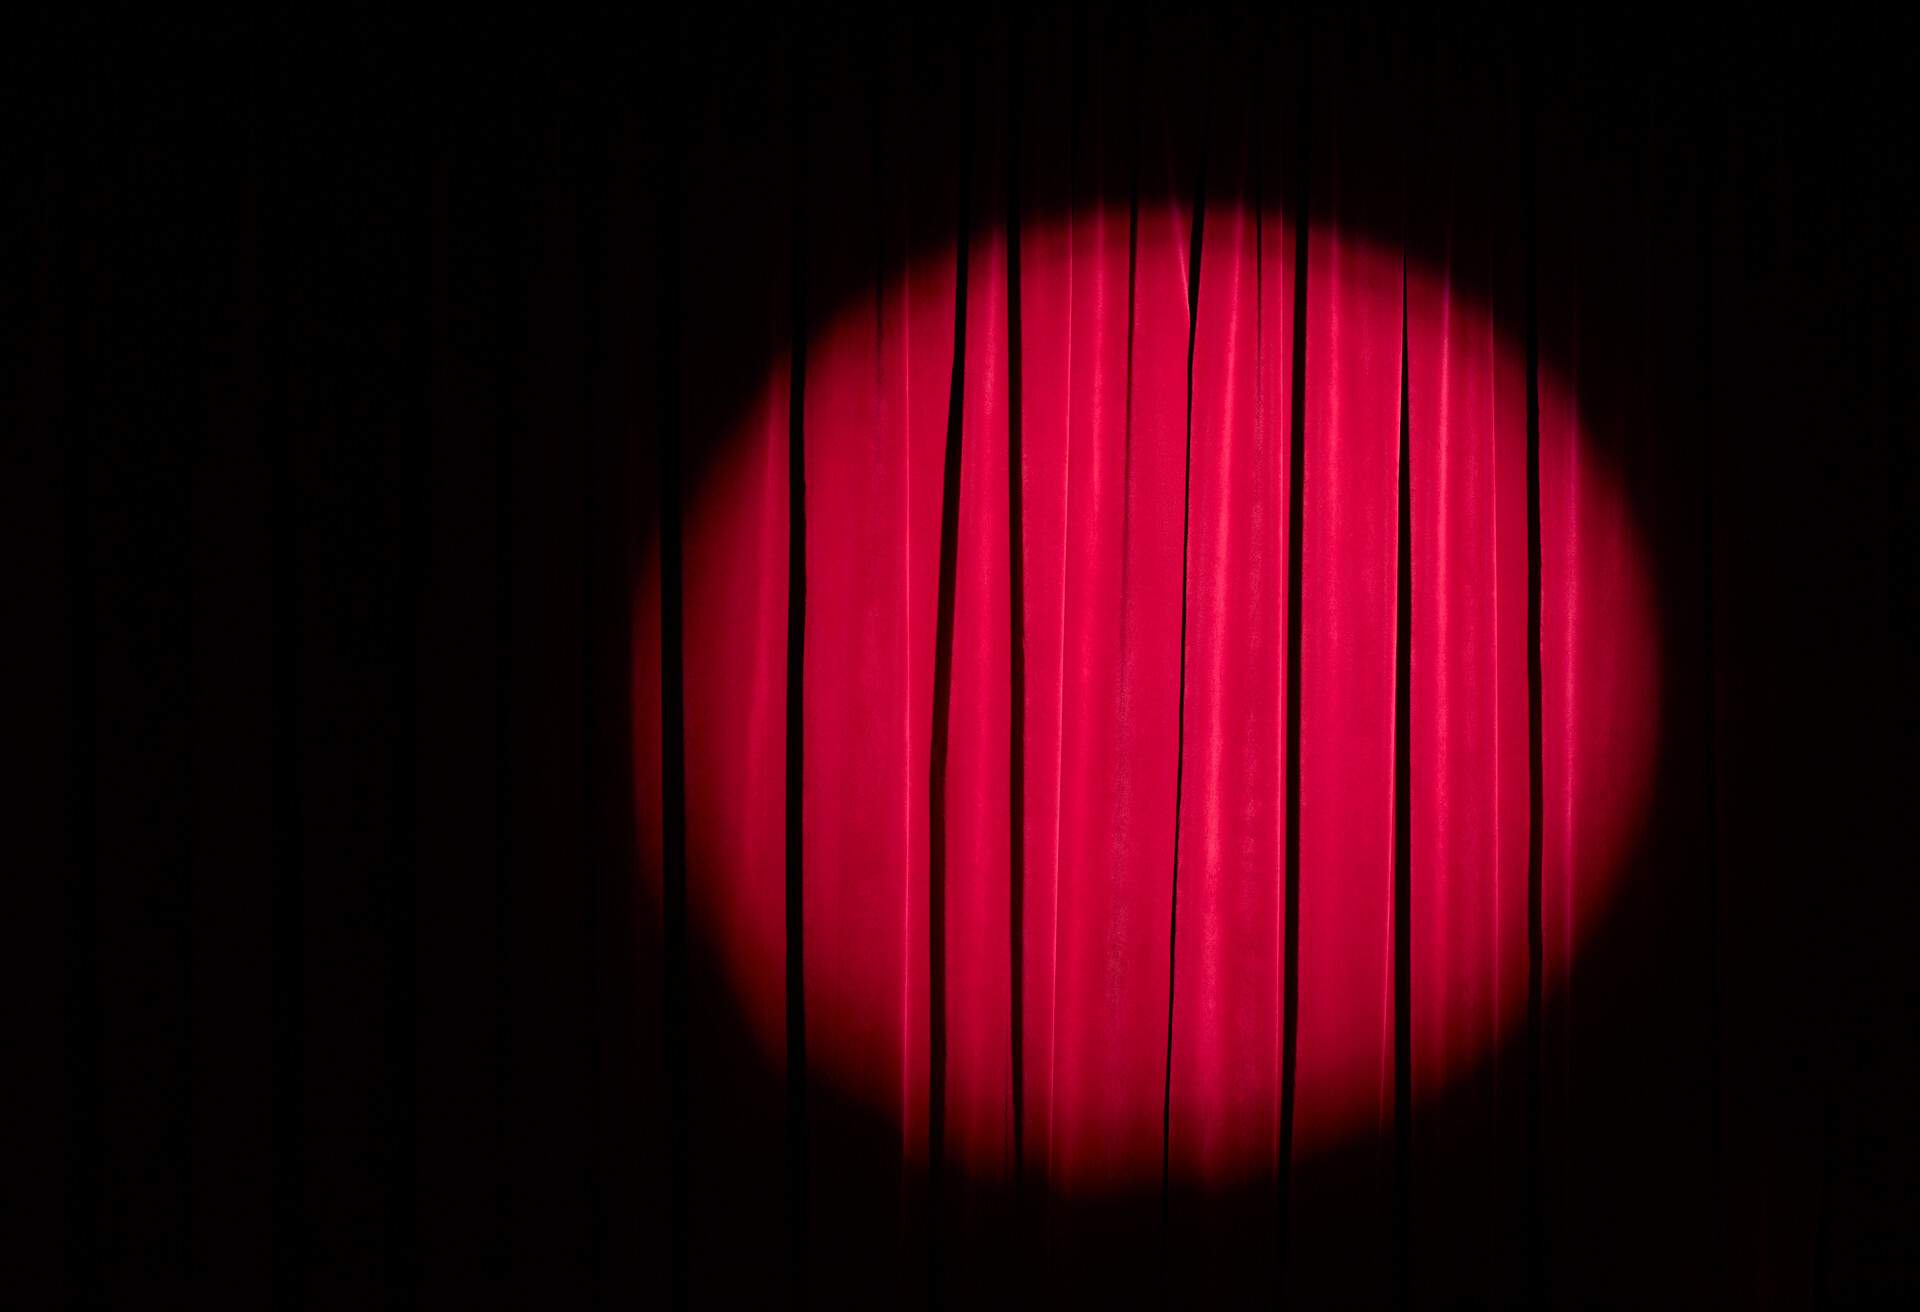 A circle spotlight shining on a red curtain.